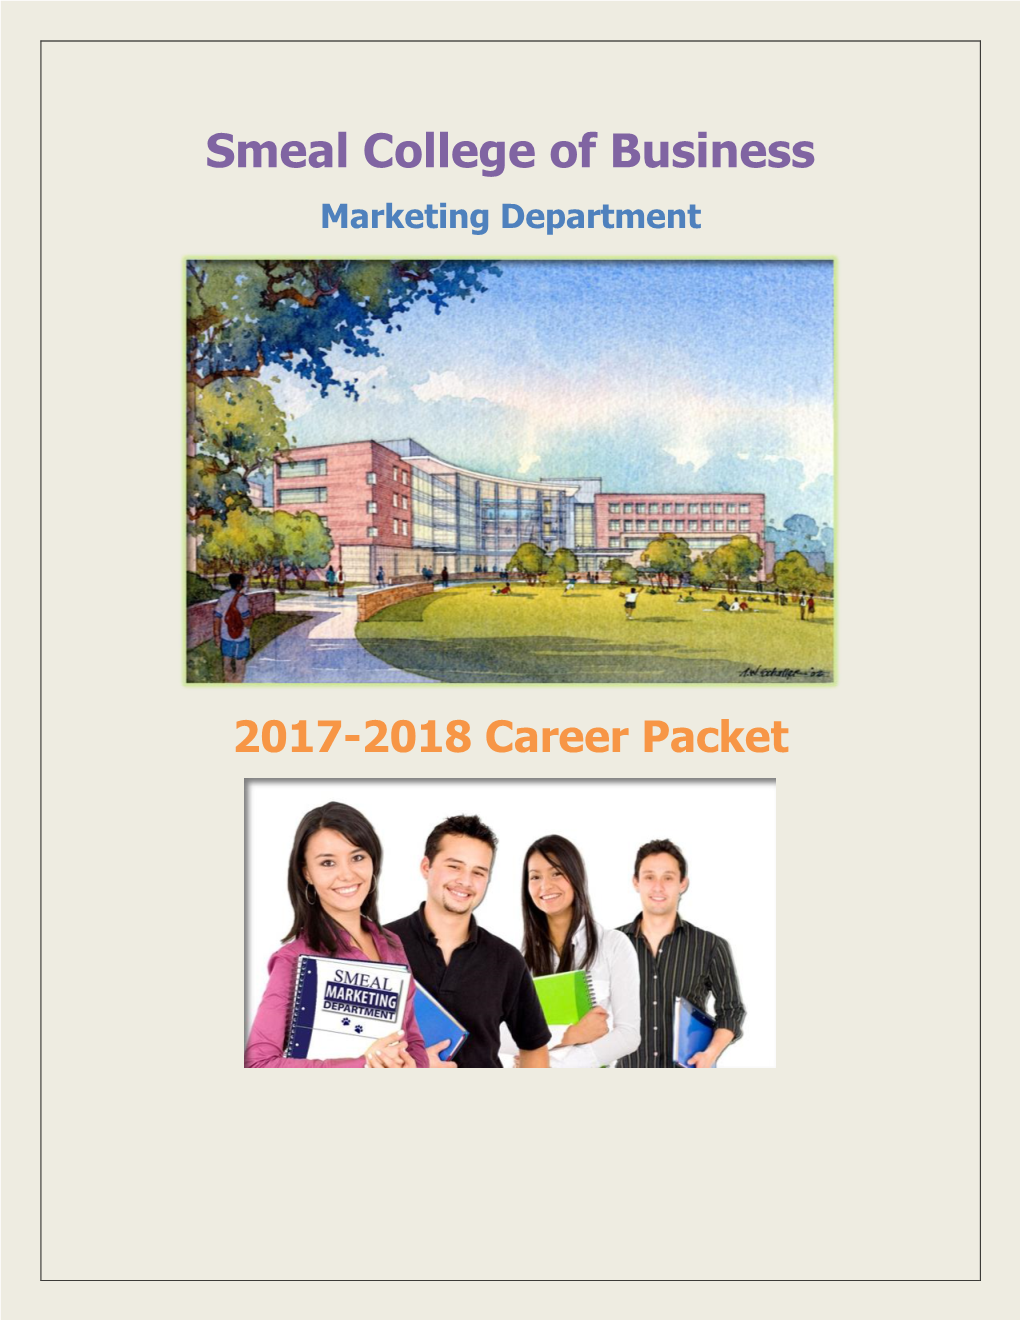 Smeal College of Business Marketing Department